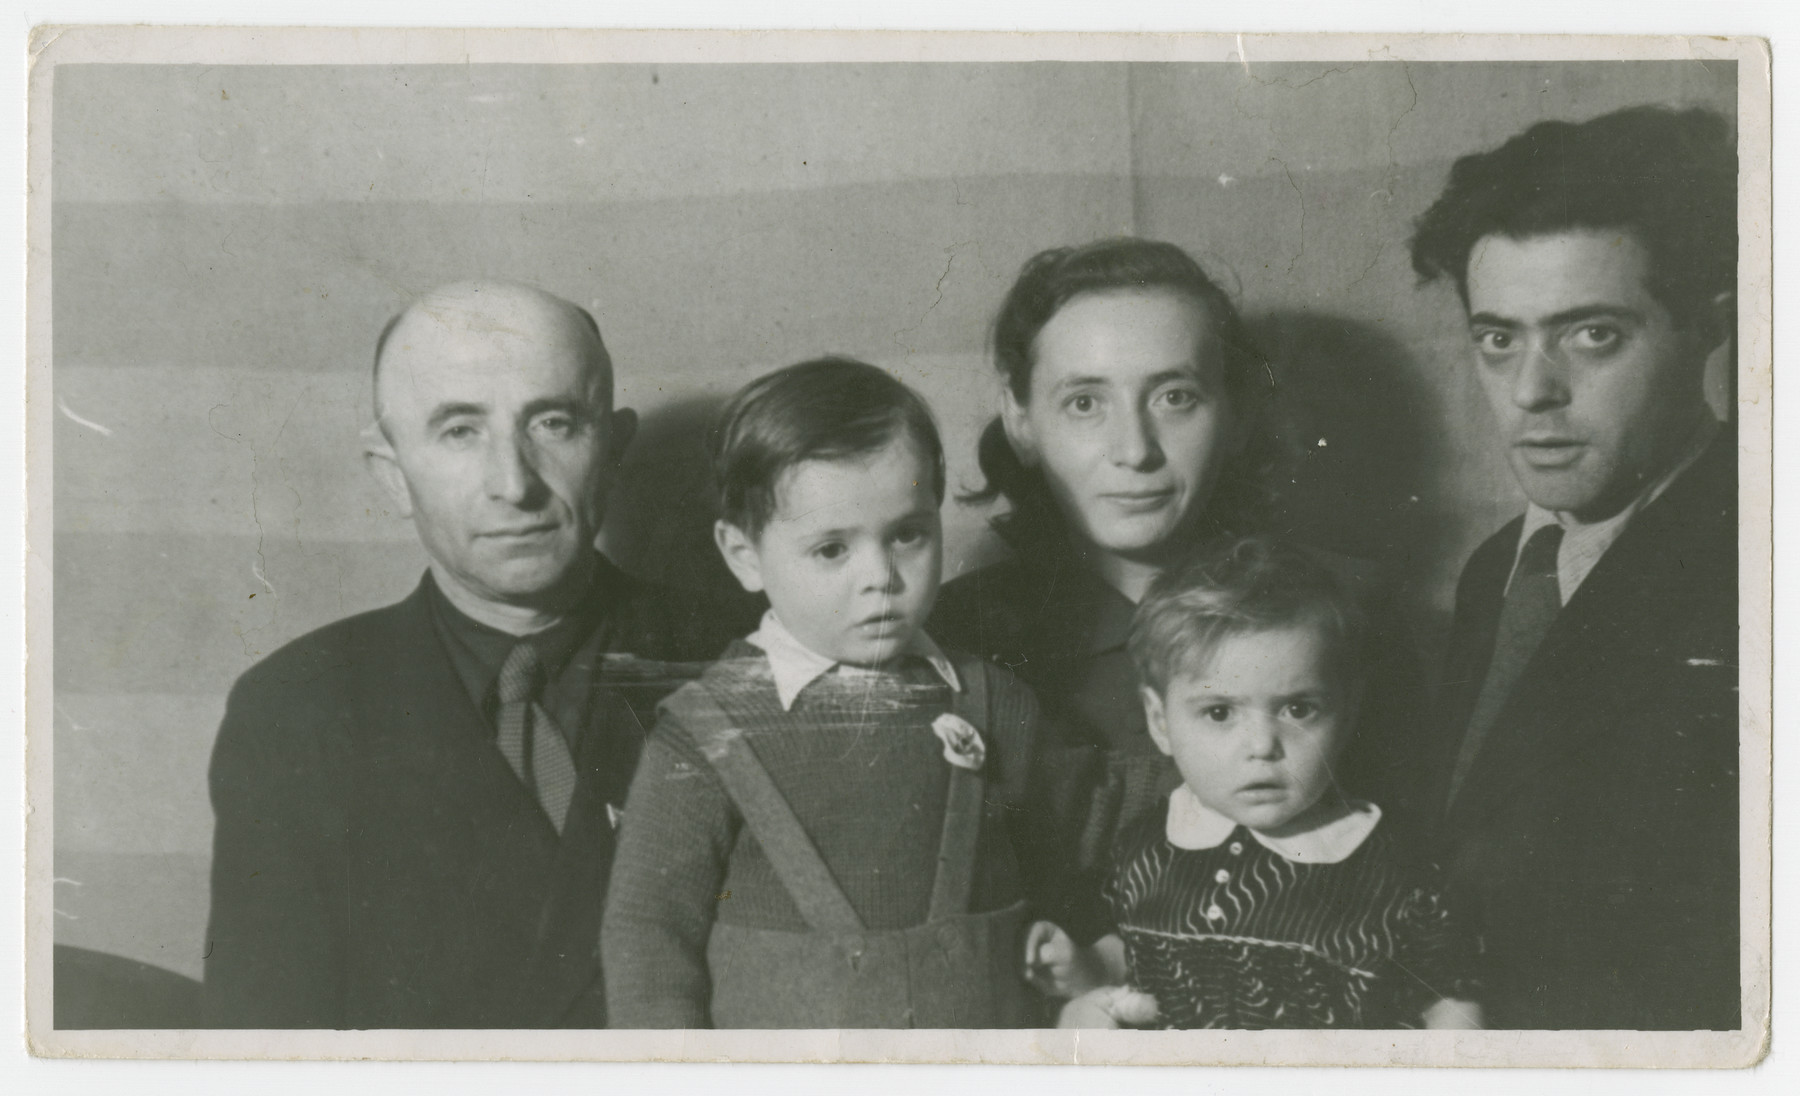 Postwar portrait of the Fridling family in the Schlachtensee displaced persons camp.

From left to right are Abe, Joseph, Gitla, Andzia (Chana) and Abe Fridling.  (The two Abe Fridlings were cousins.)